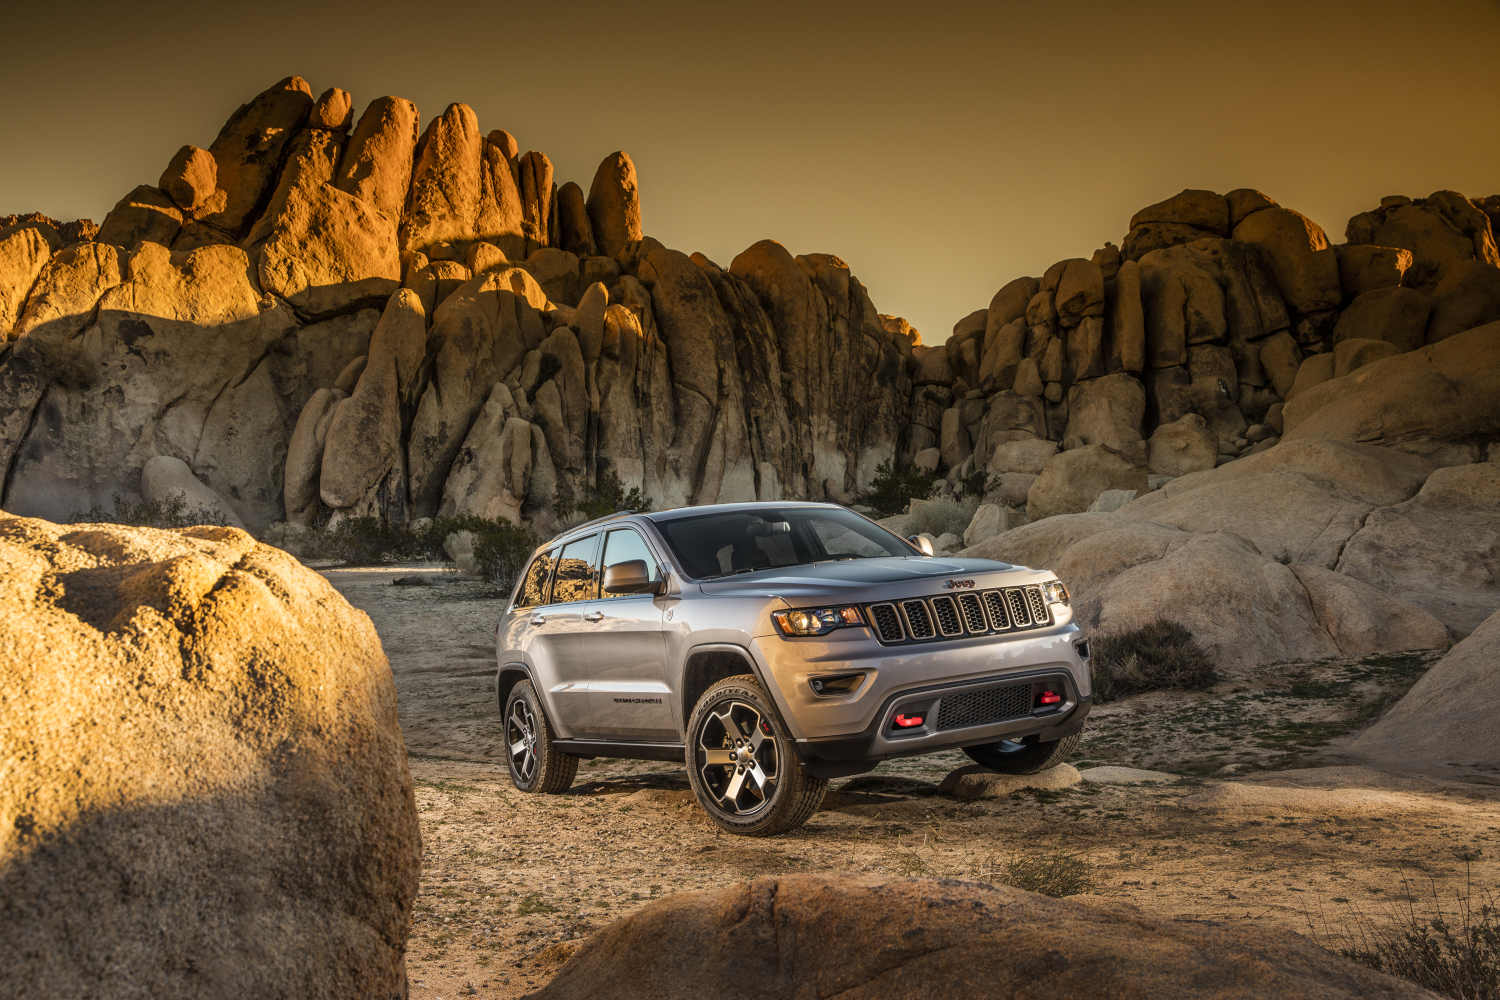 Cheap SUVs like this Jeep Grand Cherokee can be found in Florida